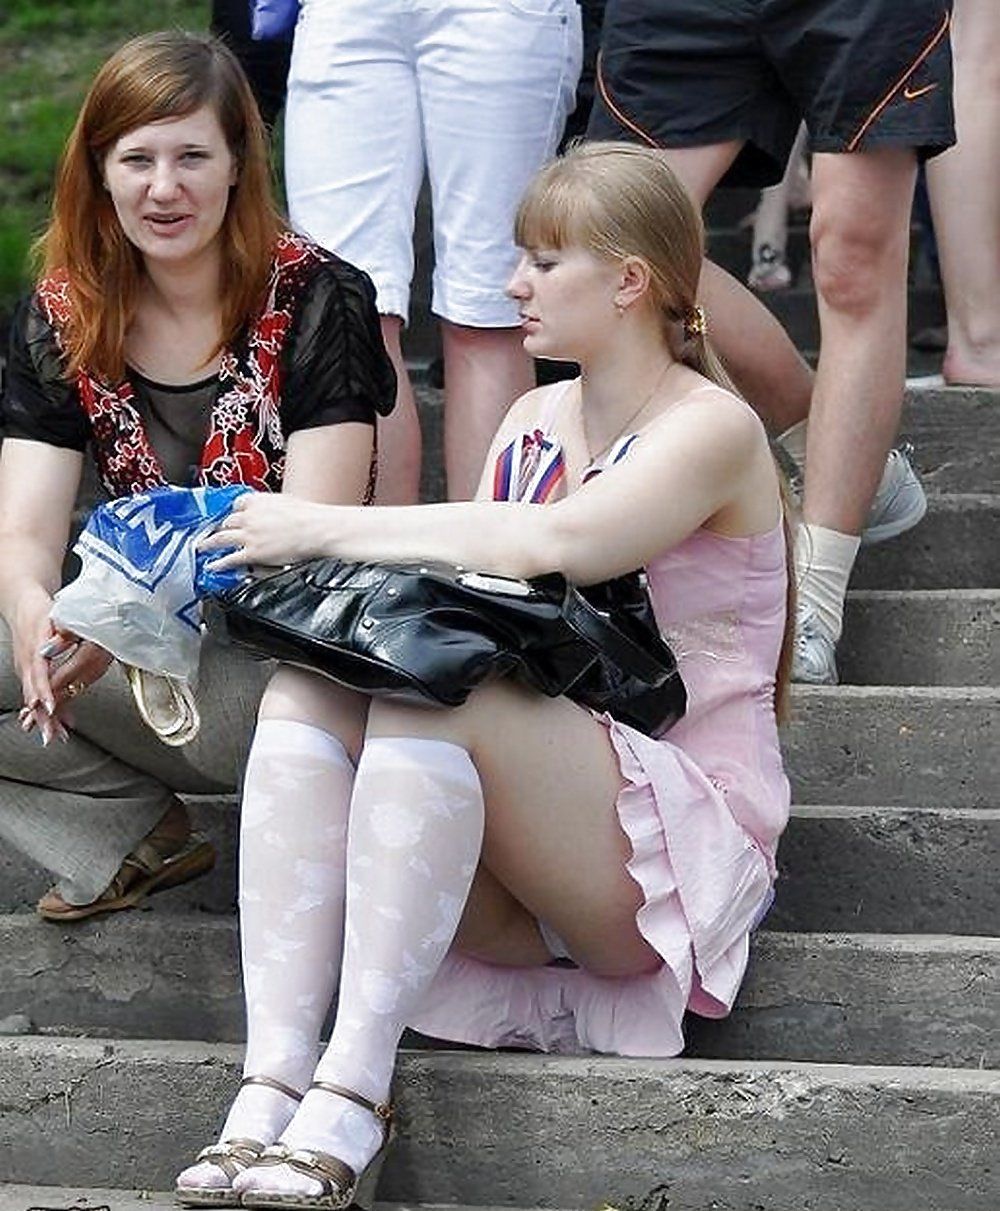 One of the greatest upskirts on stairs